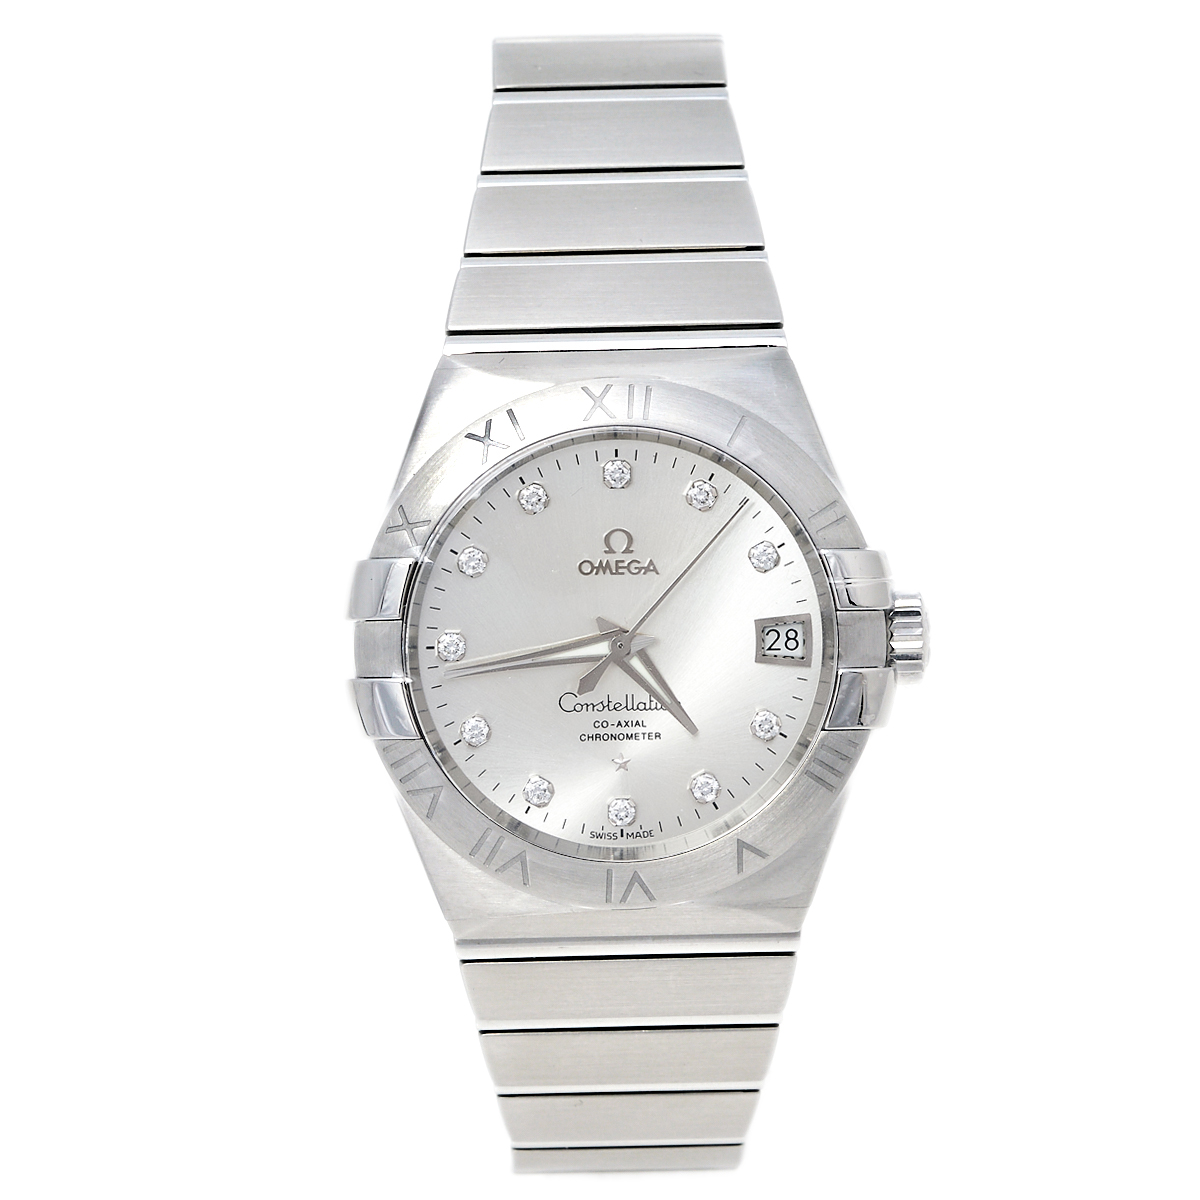 Omega Silver Diamond Stainless Steel Constellation Co-Axial 123.10.38.21.52.001 Men's Wristwatch 38 mm